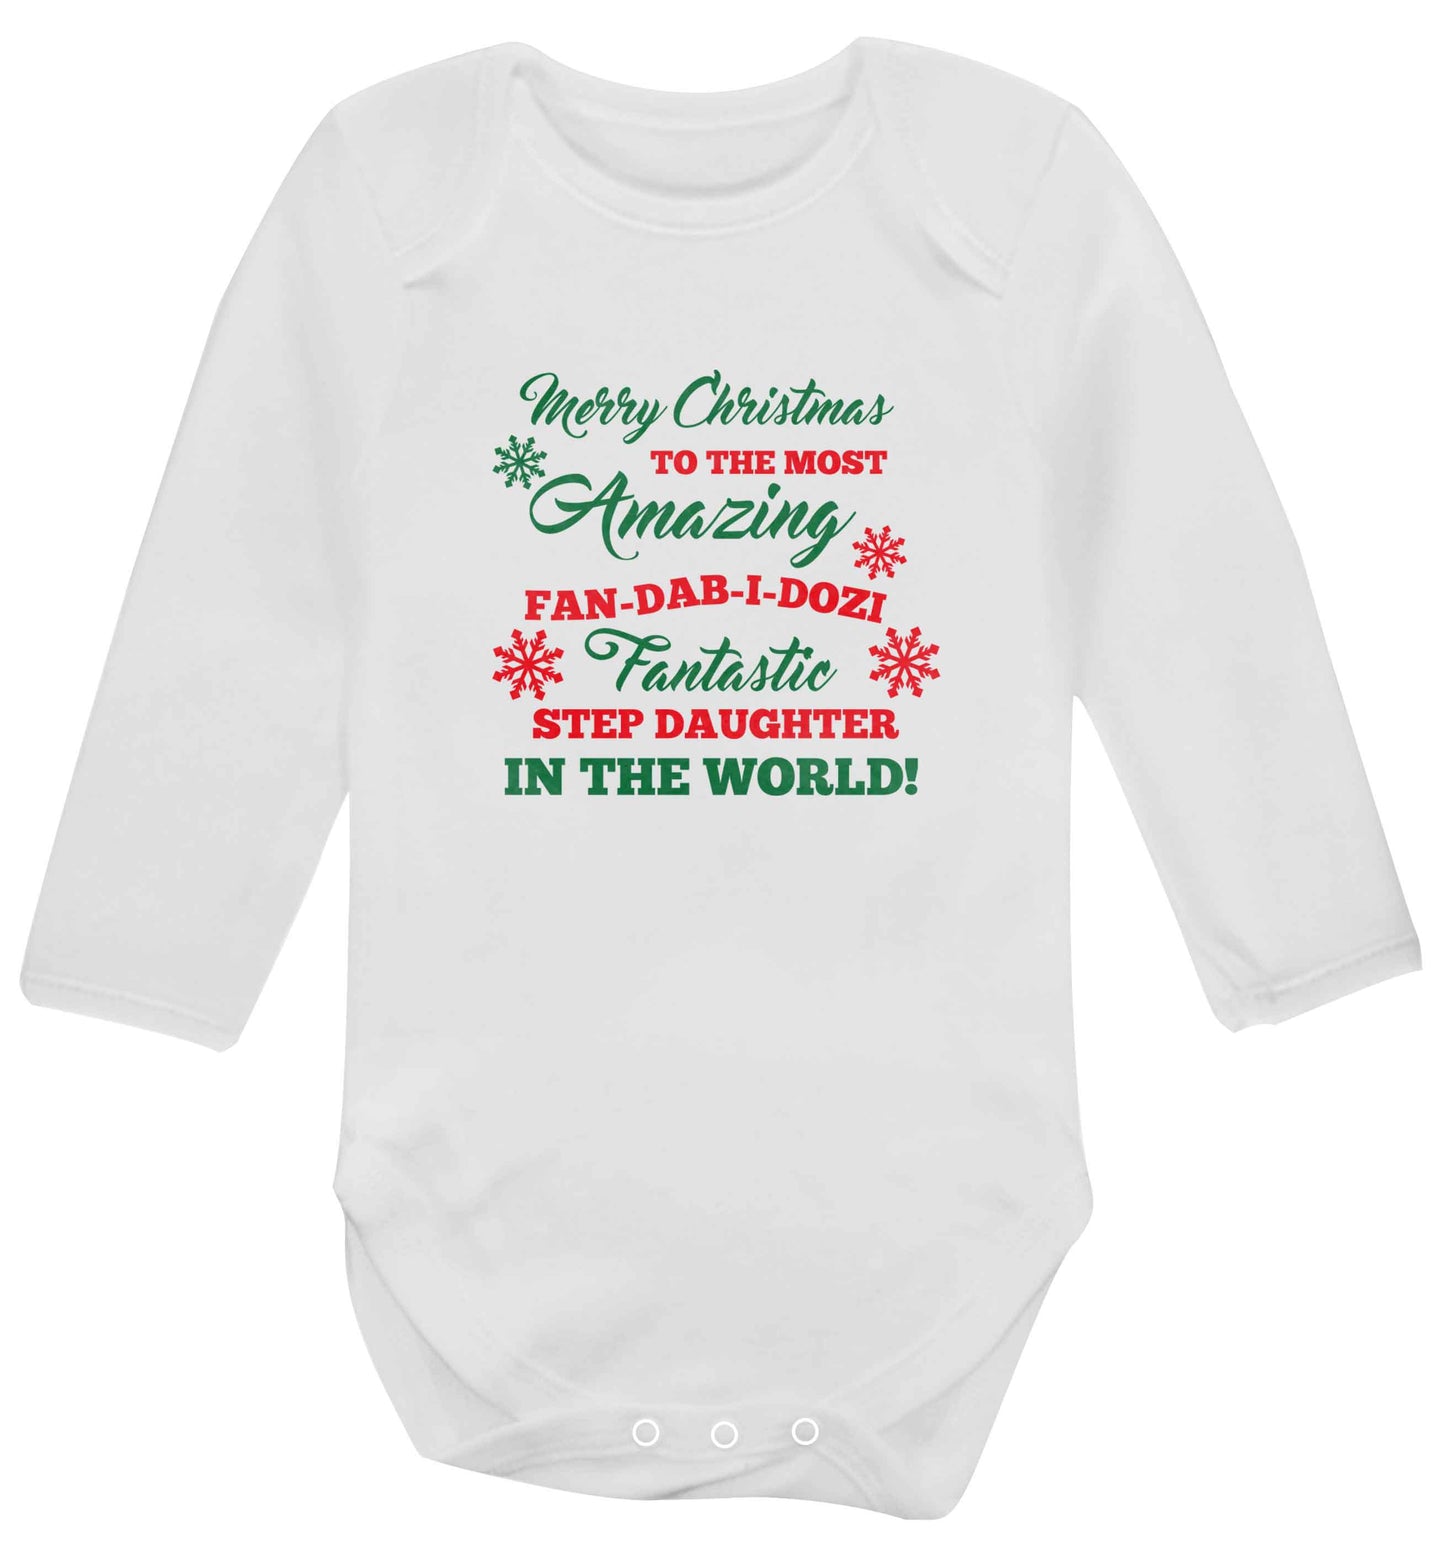 Merry Christmas to the most amazing fan-dab-i-dozi fantasic Step Daughter in the world baby vest long sleeved white 6-12 months